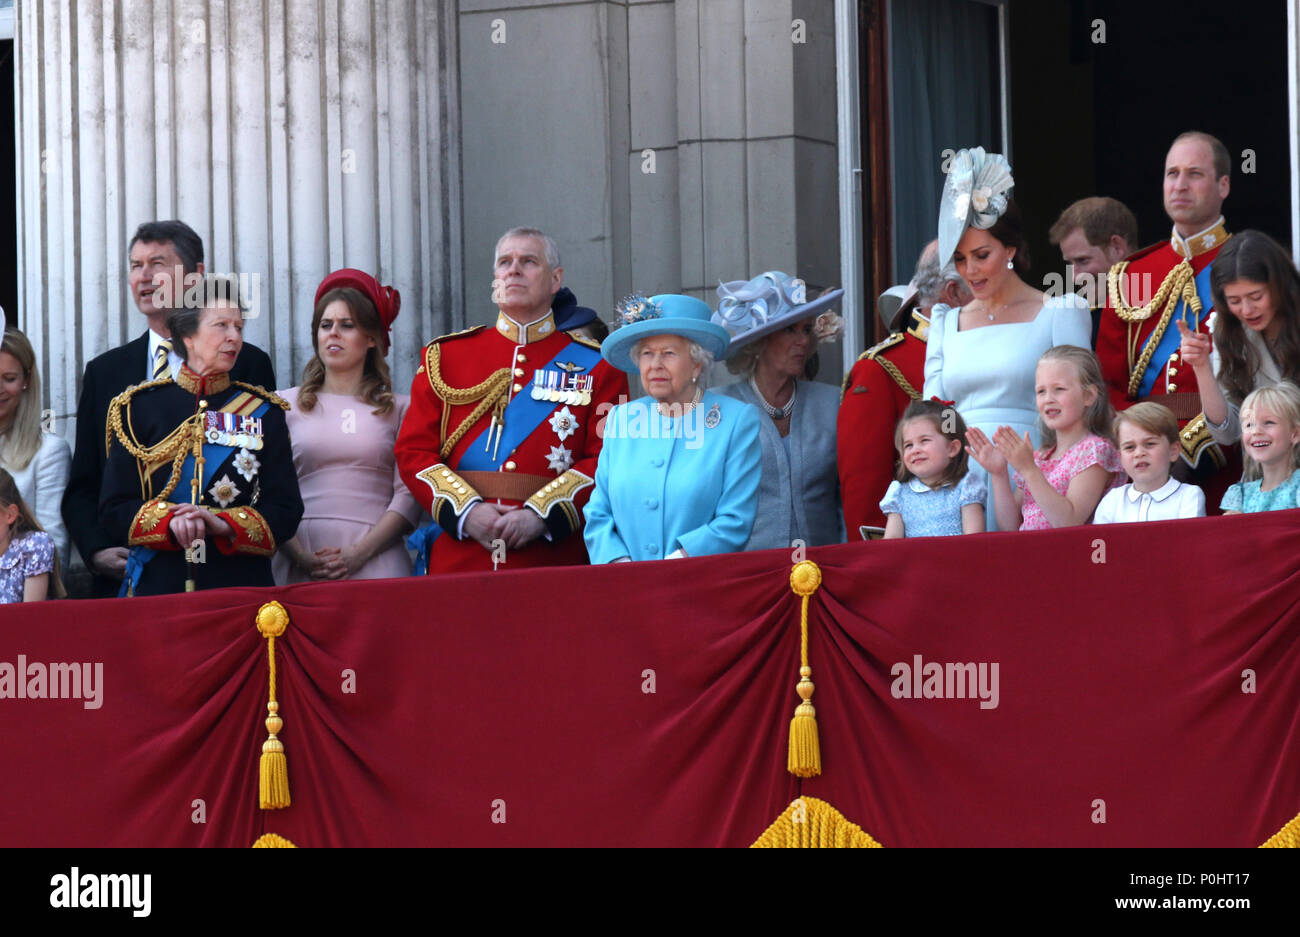 The British Royal family at the Trooping of the Colour 2018. Trooping the Colour marks the Queens official birthday. Trooping the Colour, London, June 09, 2018 Stock Photo